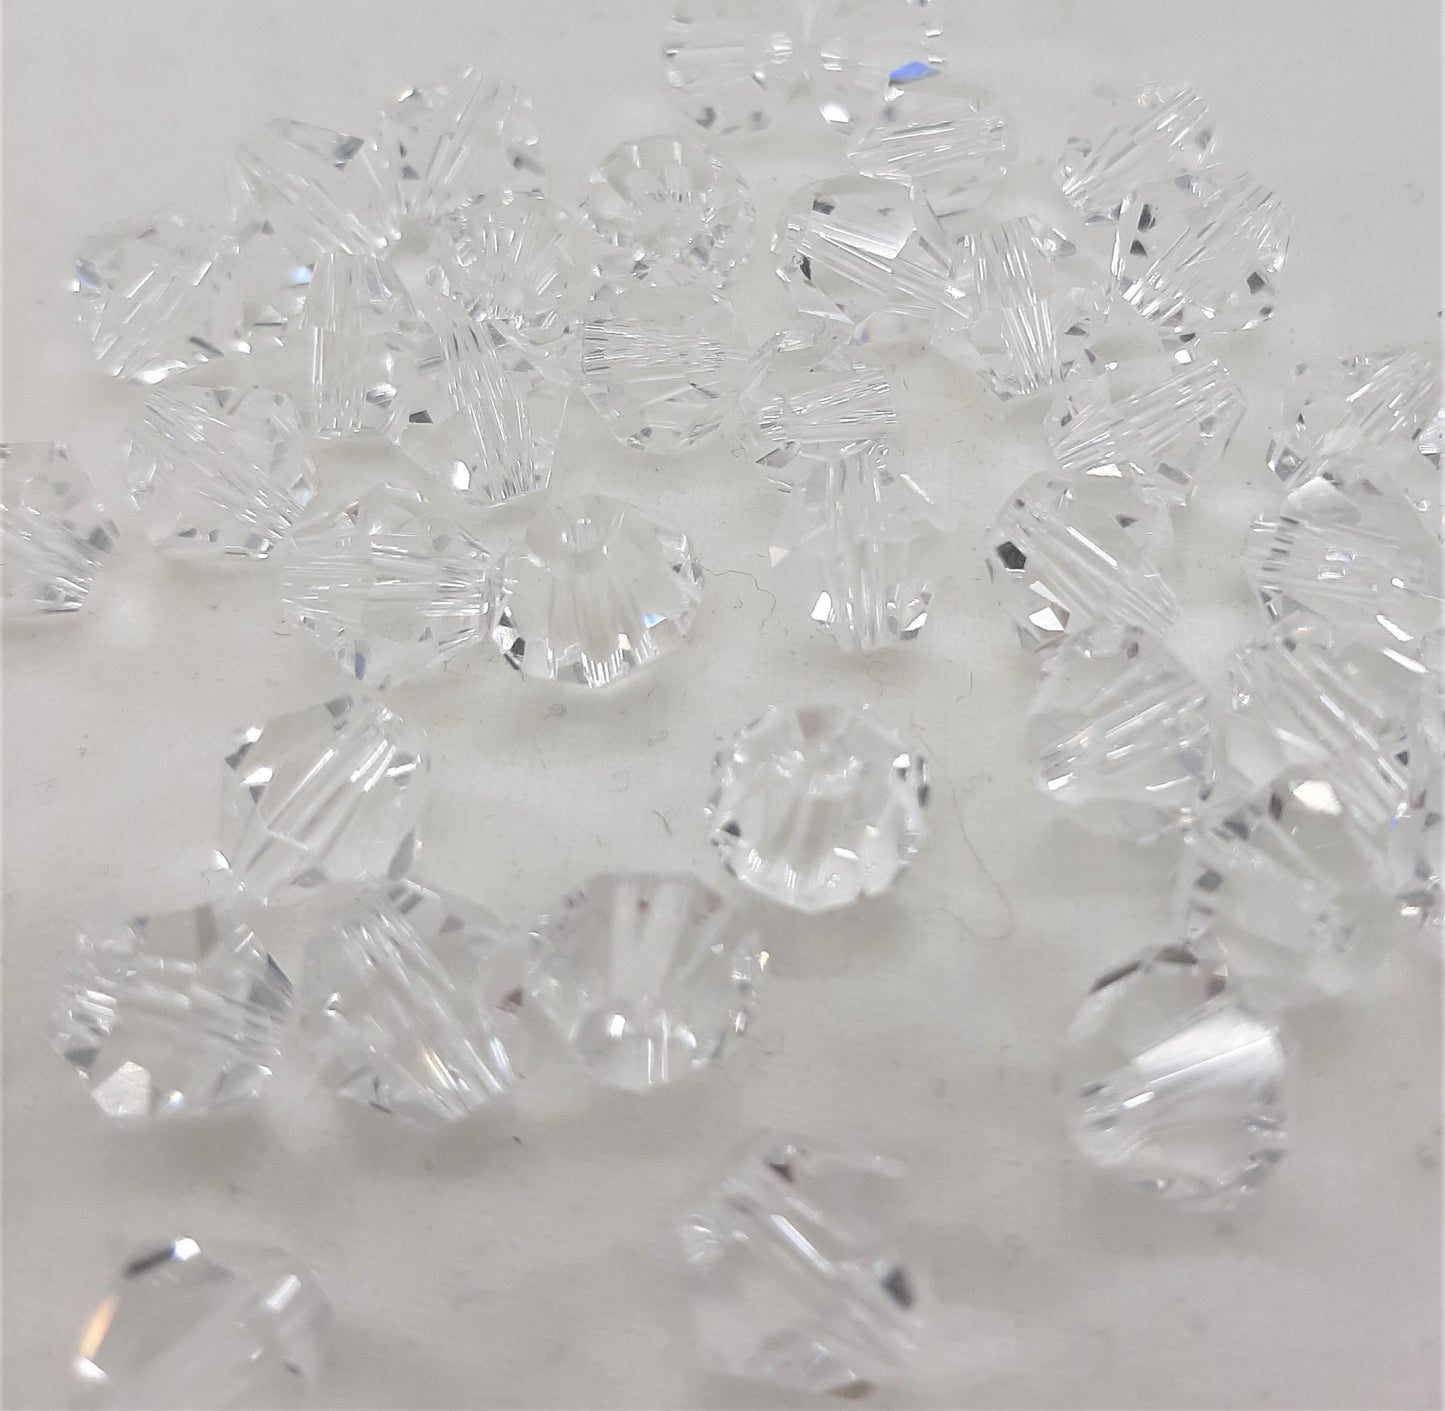 LARGE PACKS OF BICONE GLASS CLEAR CRYSTAL BEADS